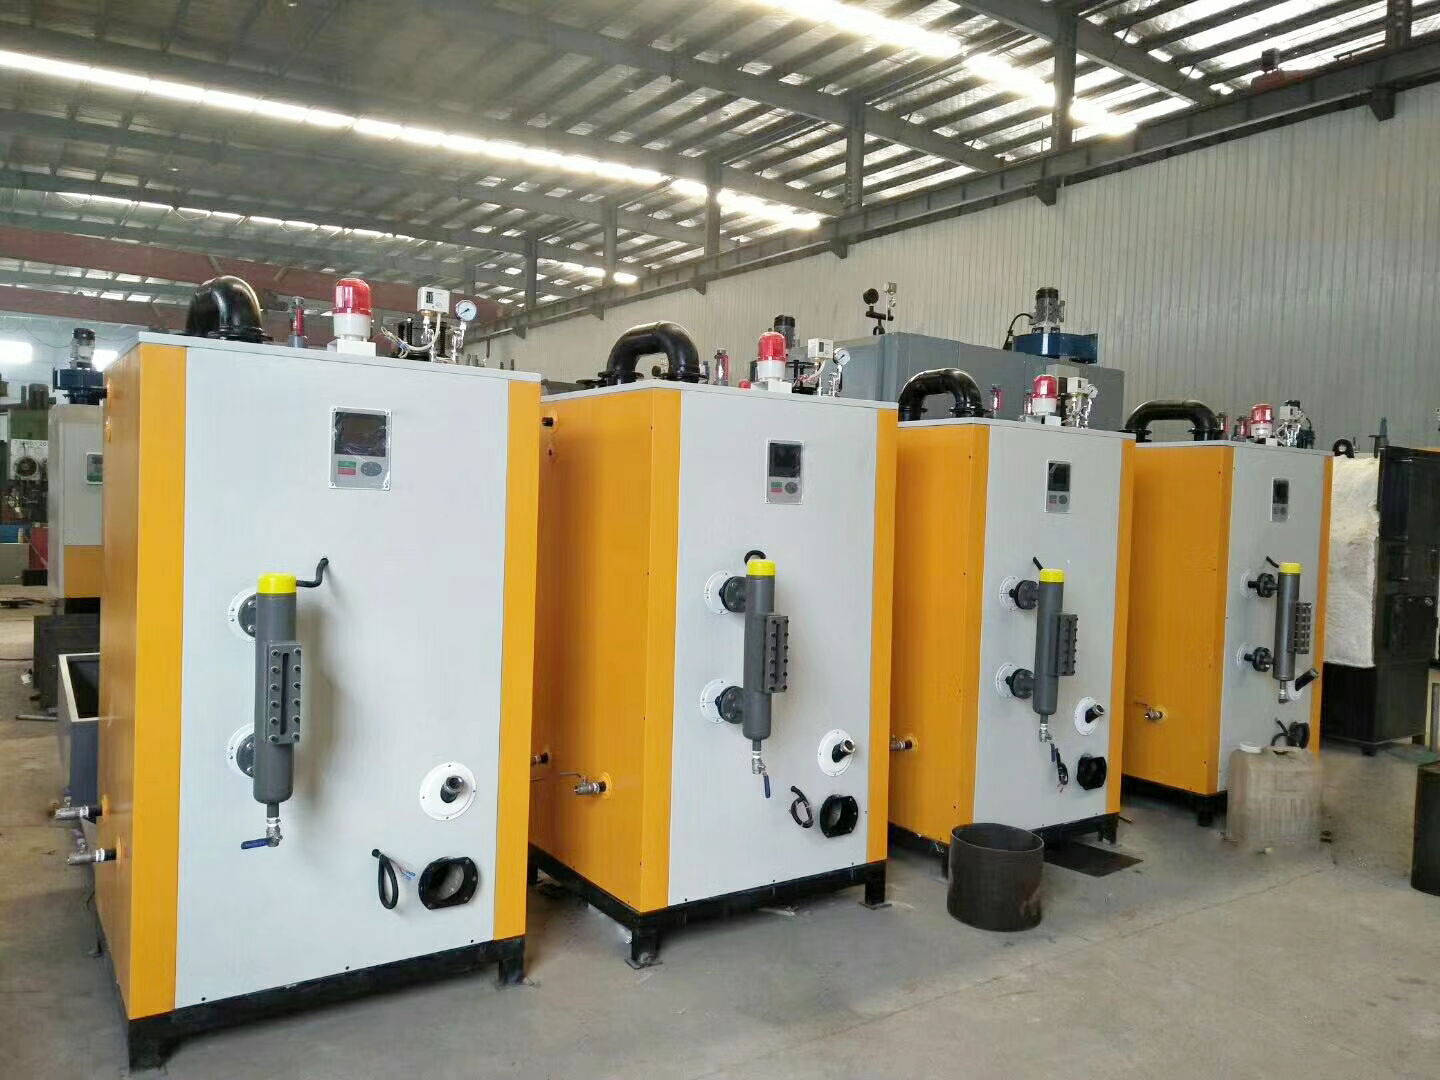 Fully automatic 400kg/h gas steam boiler for industrial production